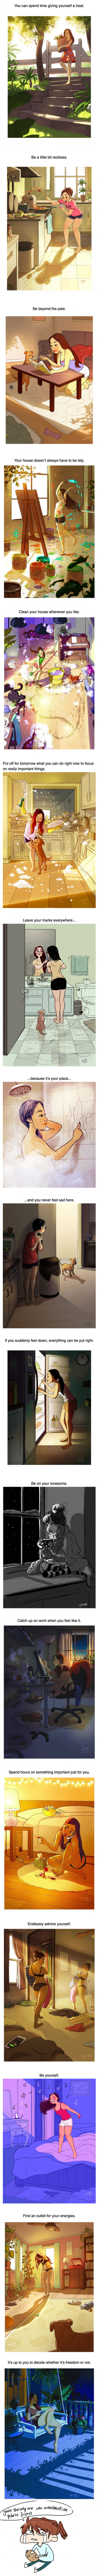 18 Heart-Warming Cartoons Showing The Happiness Of Living Alone